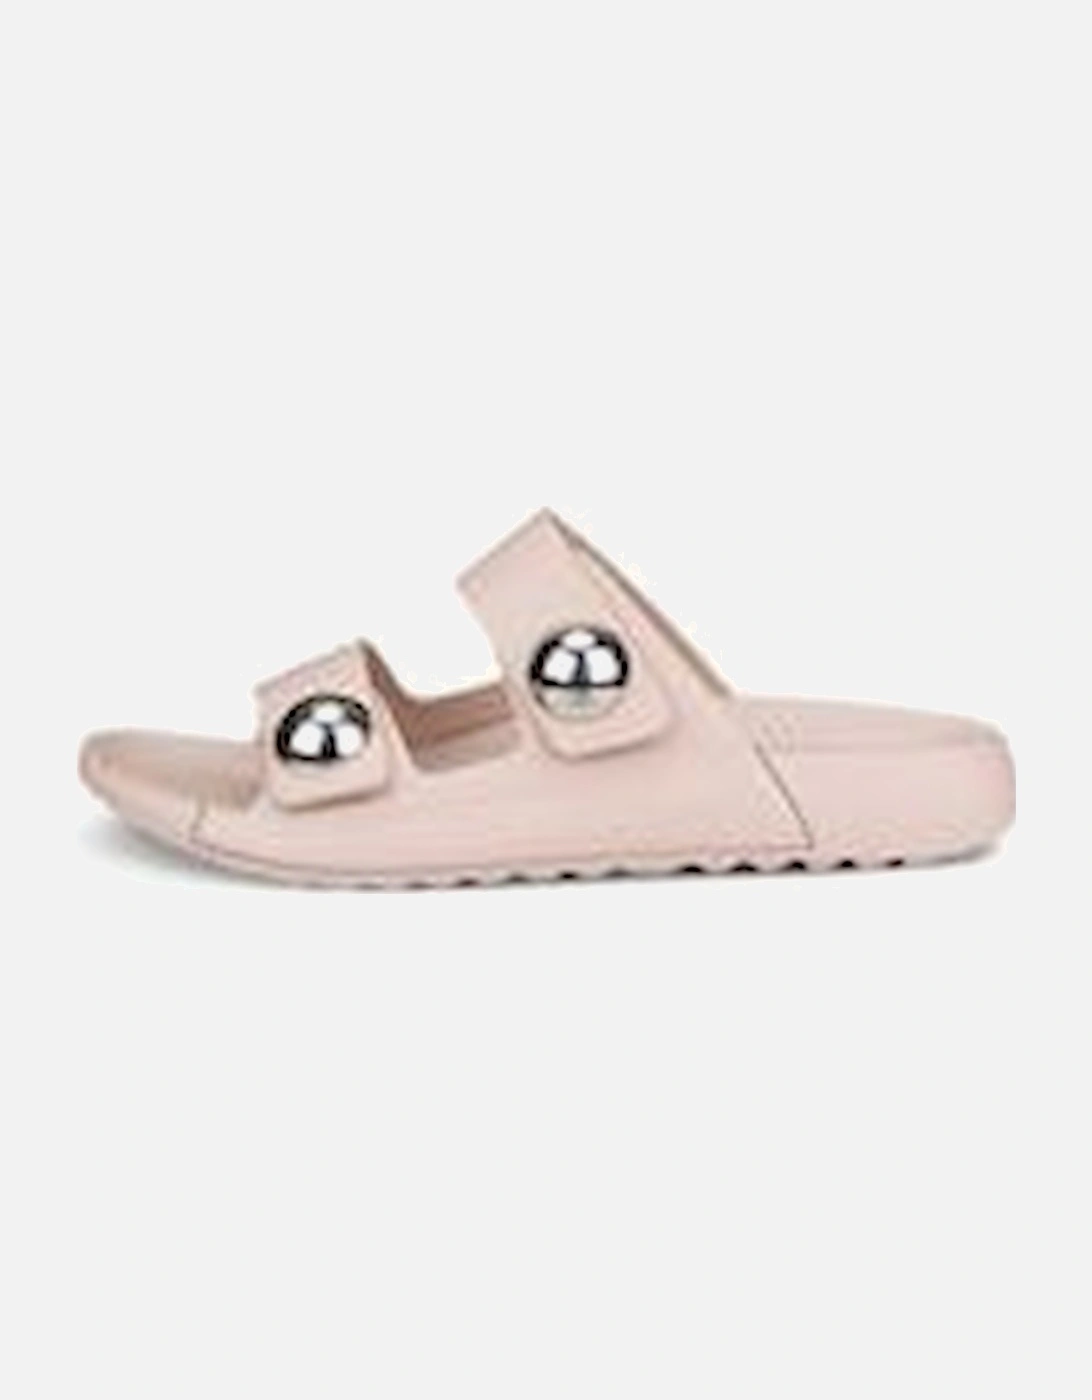 Cozmo Sandal 206883-01118 in Rose Dust Leather